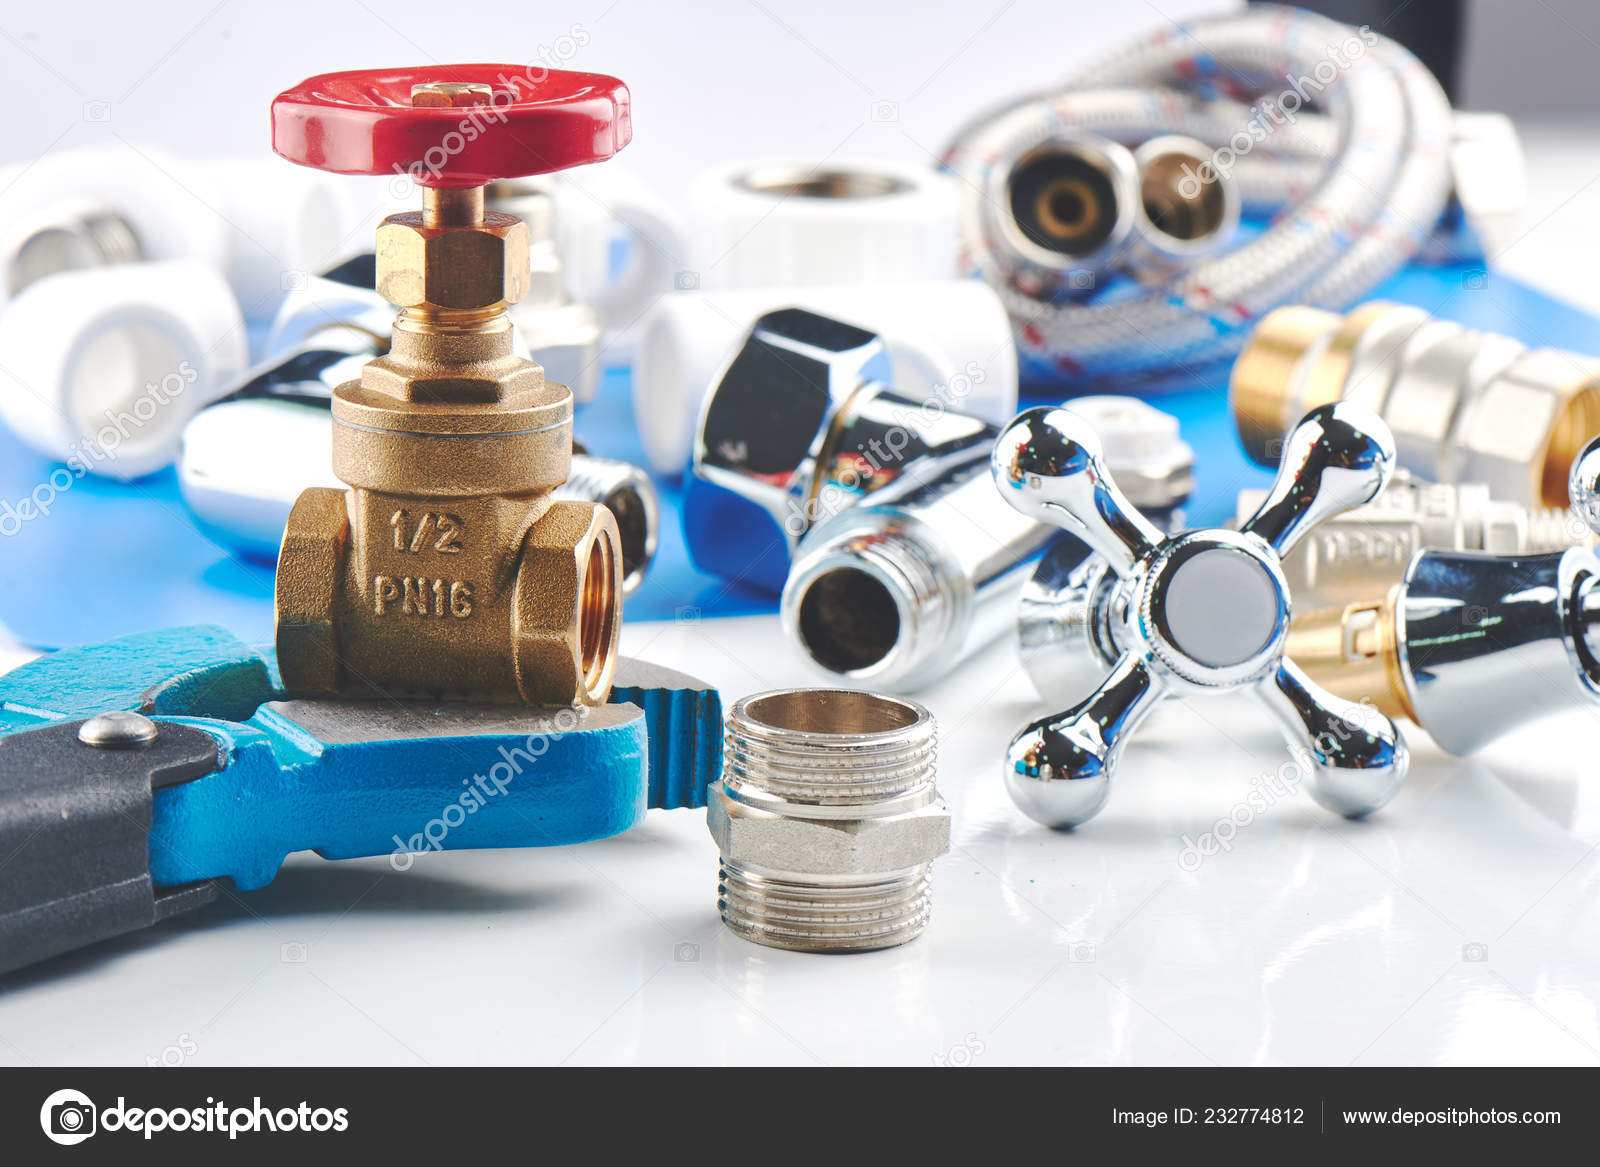 14,001 Plumbing Accessories Images, Stock Photos, 3D objects